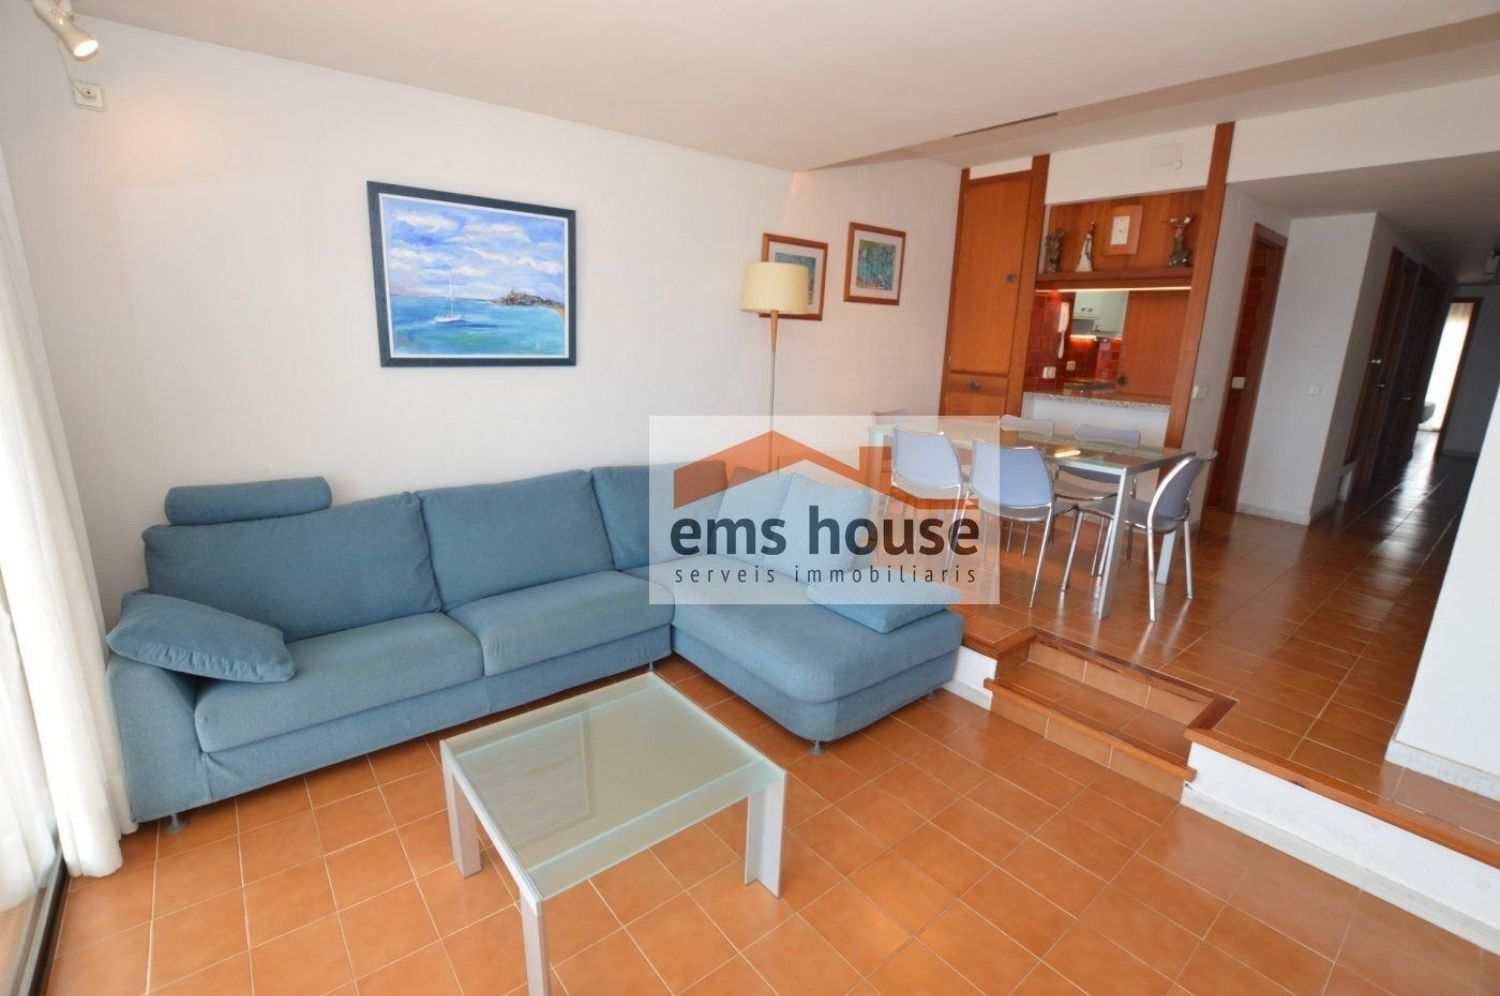 Apartment for sale on the seafront in Passeig de Josep Mundet, in Calonge